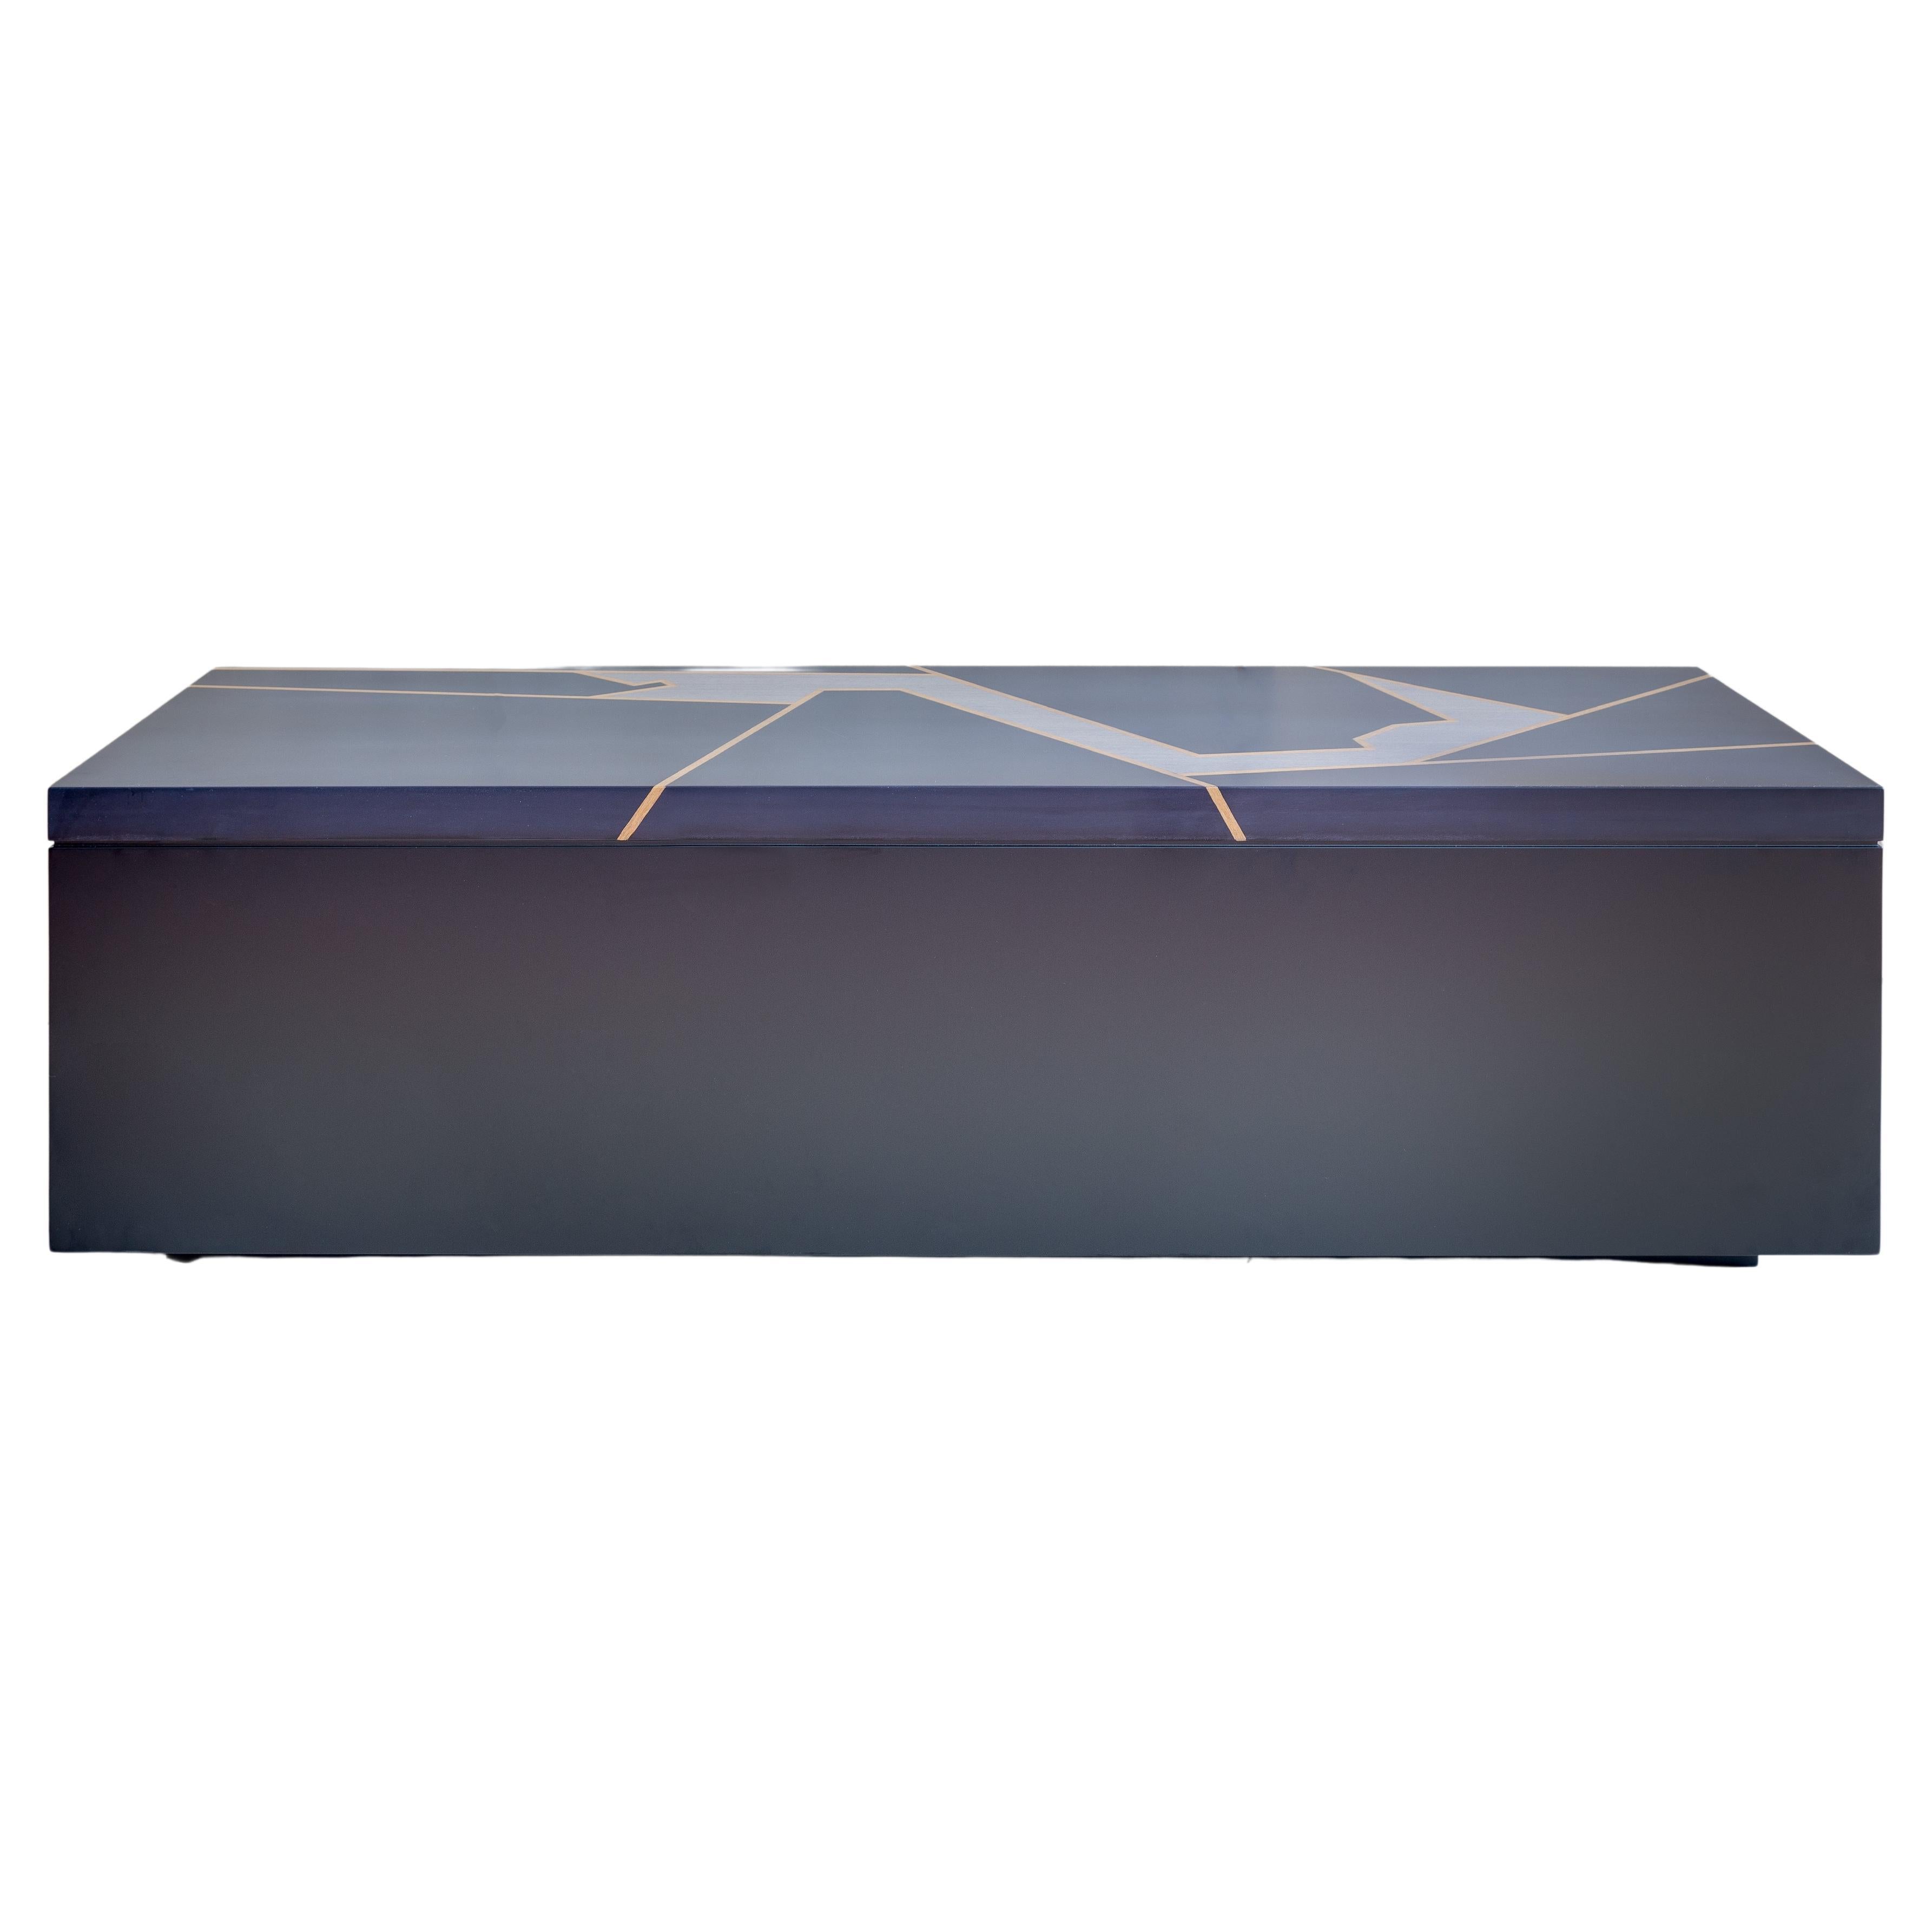 Rectangular Coffee Table Design Inspired By Monaco Formula 1 Race Track